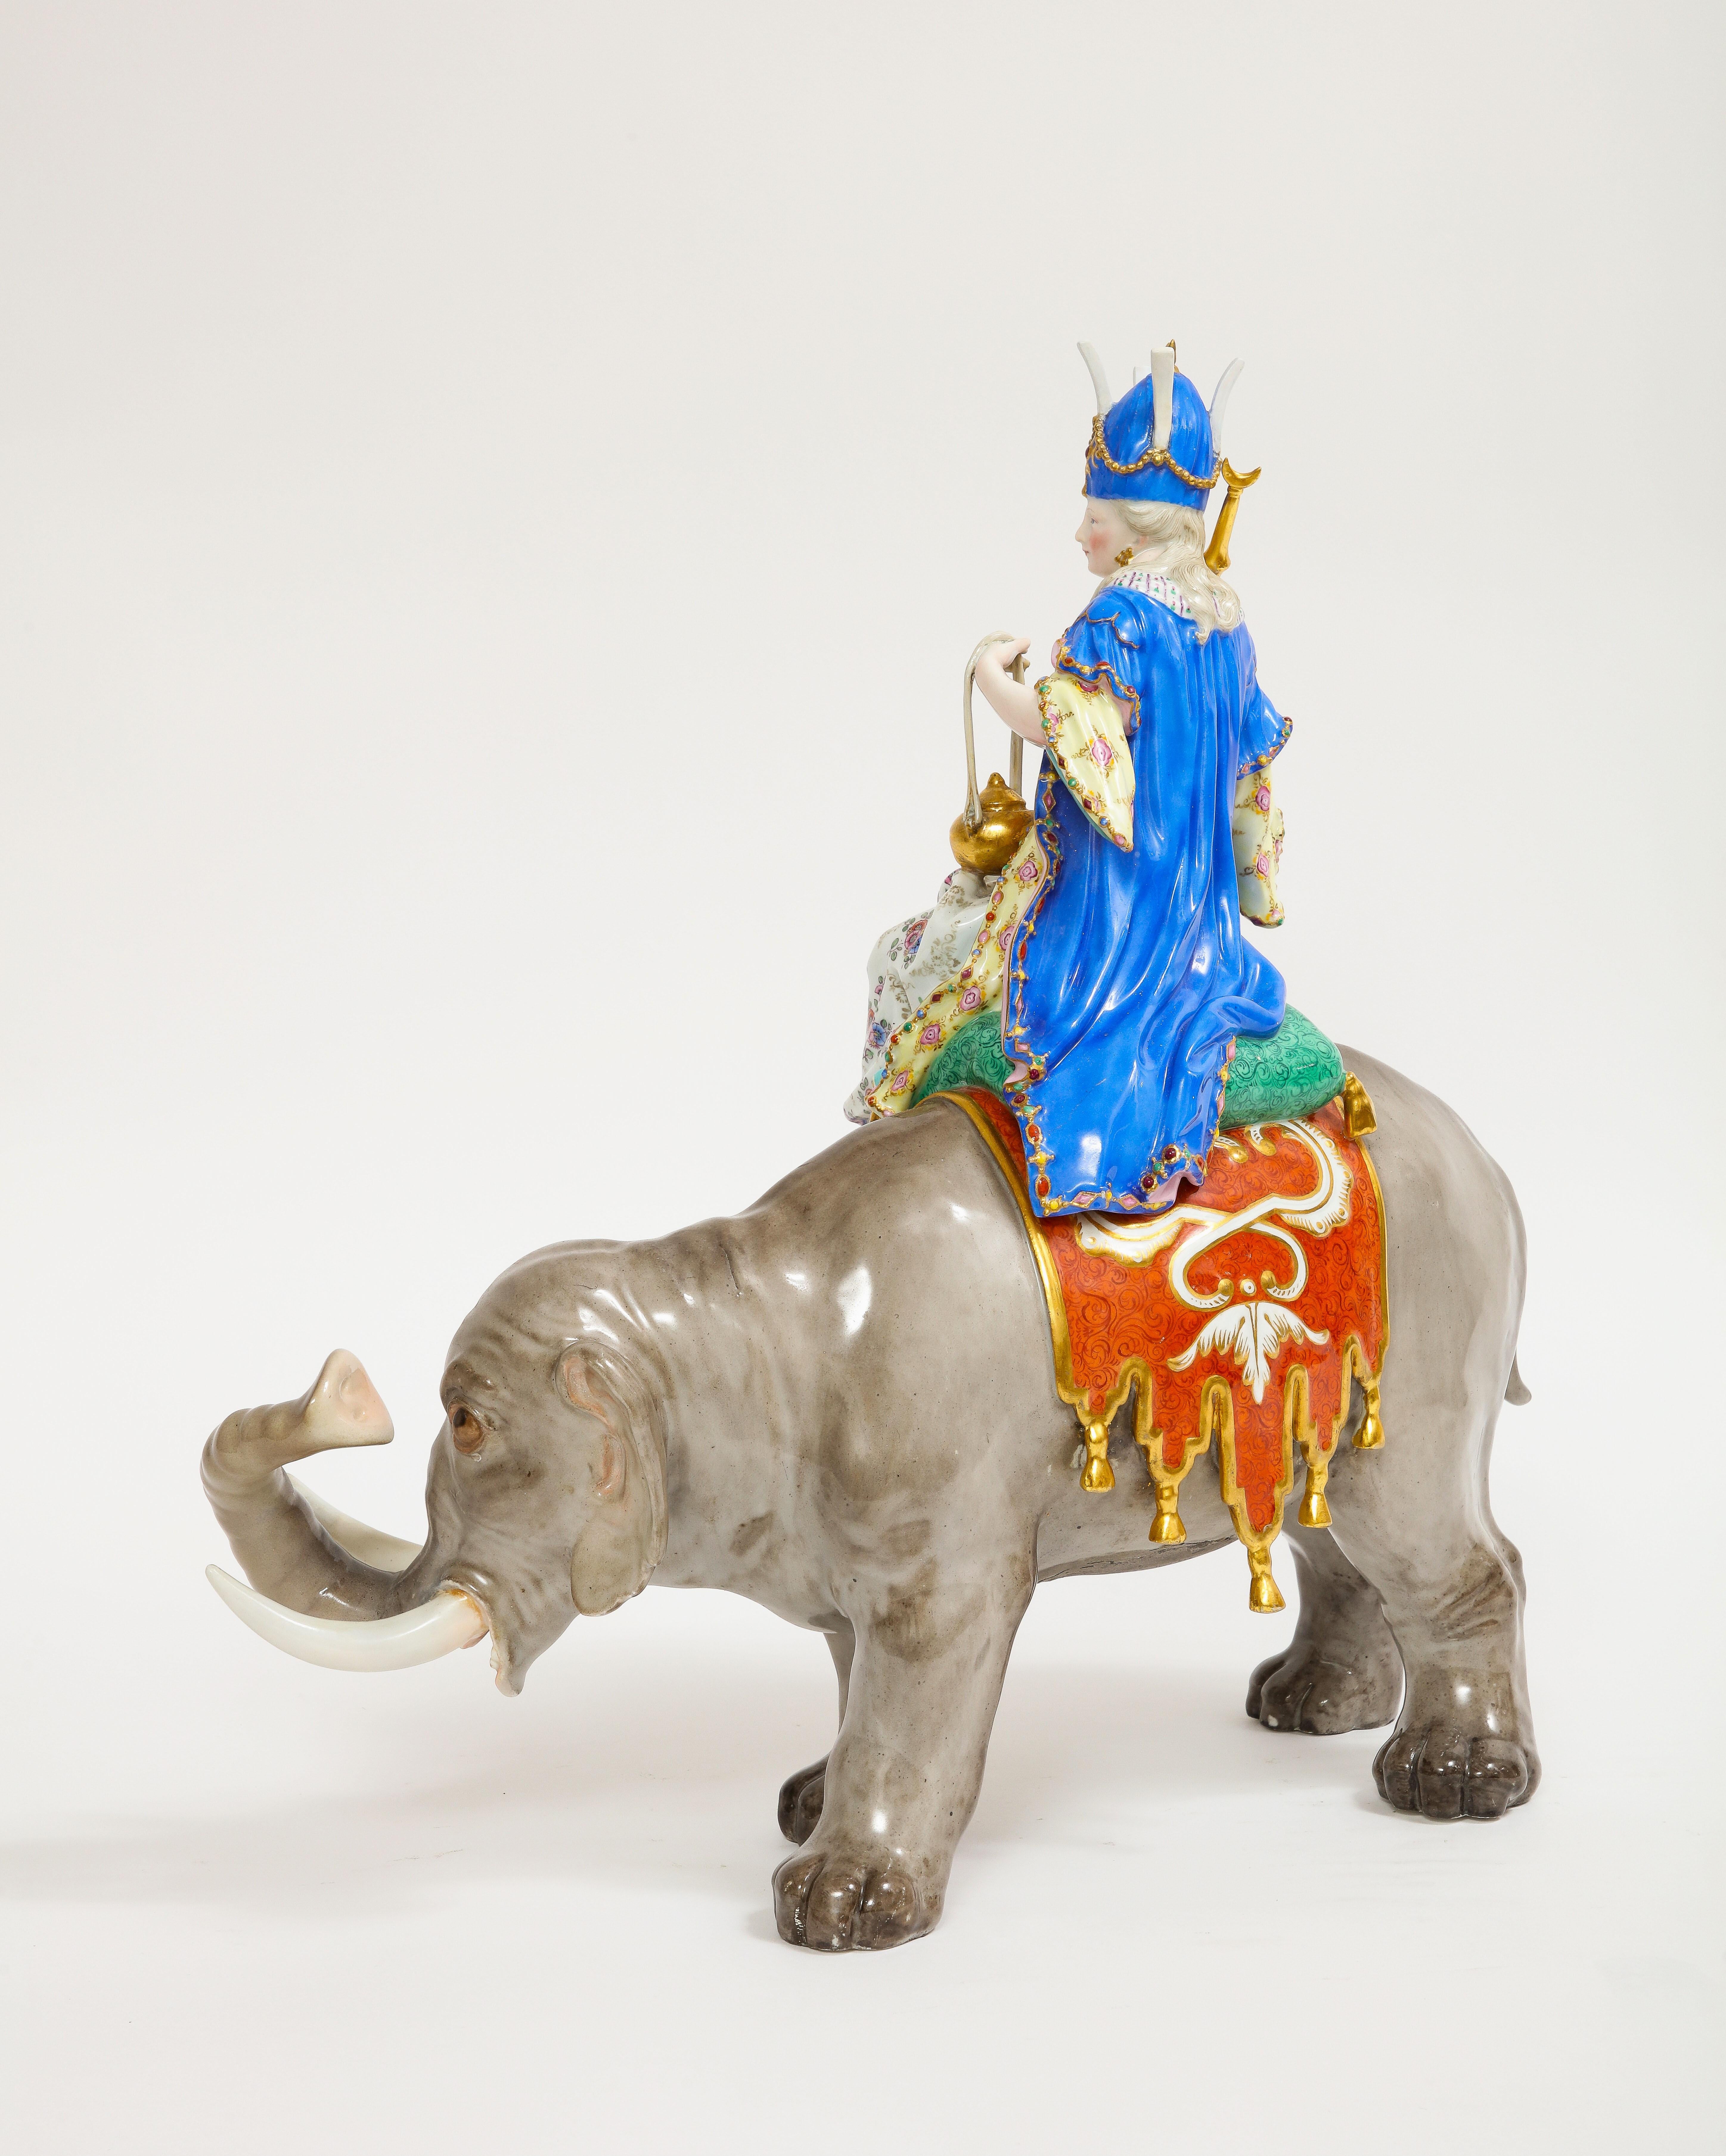 Mid-19th Century 19th C. Meissen Porcelain Figure of a Sultana Riding an Elephant with a Crown For Sale